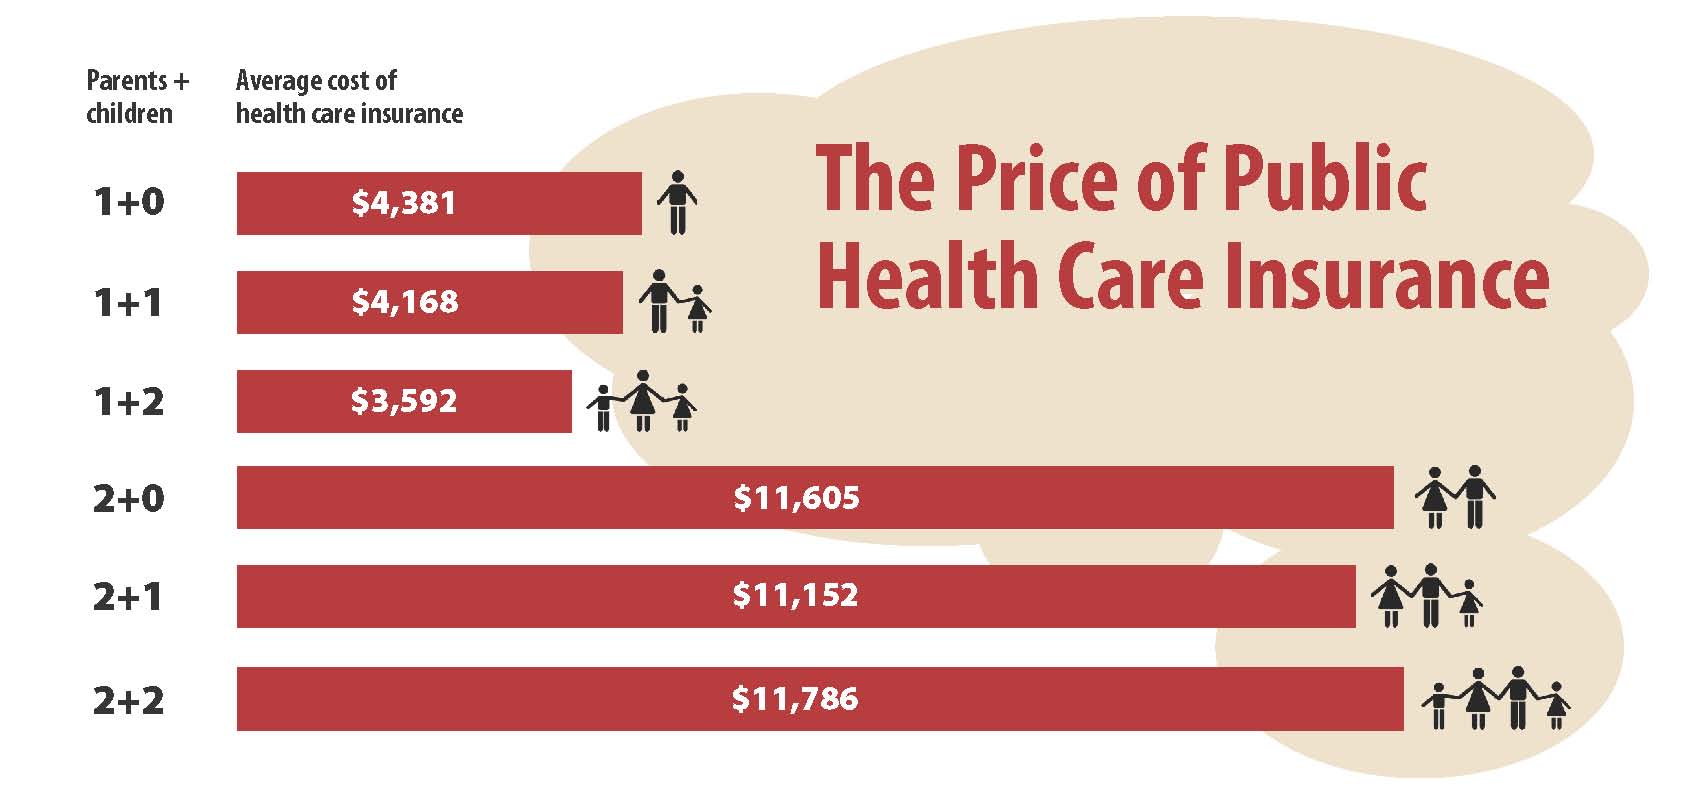 price-of-public-health-care-insurance-2014-infographic-only.jpg